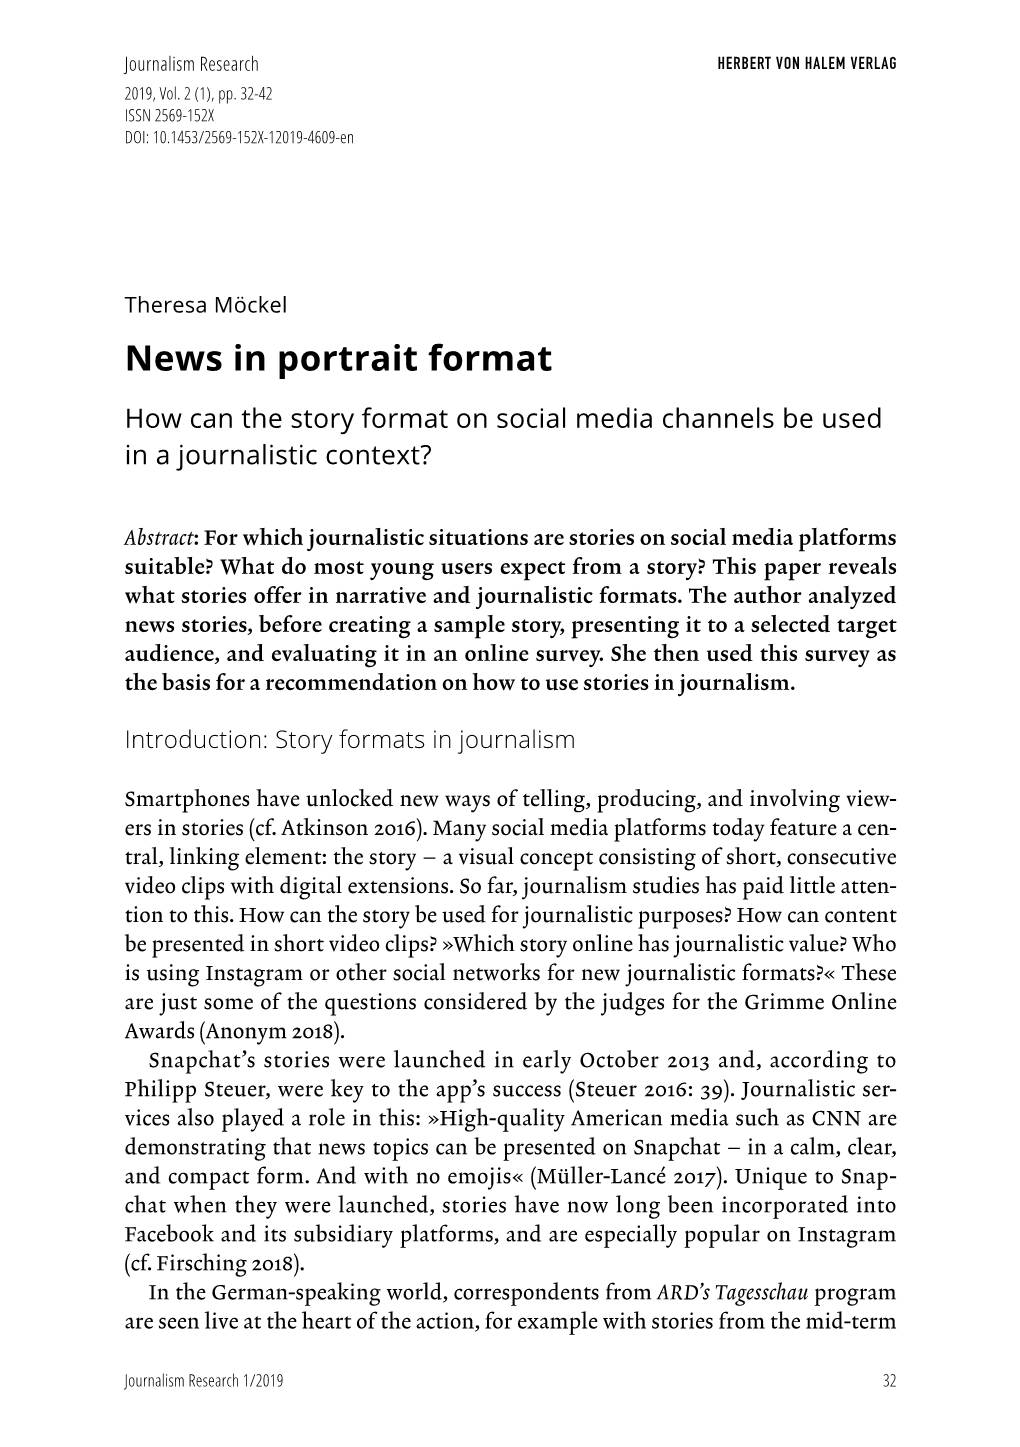 News in Portrait Format. How Can the Story Format on Social Media Channels Be Used in a Journalistic Context?